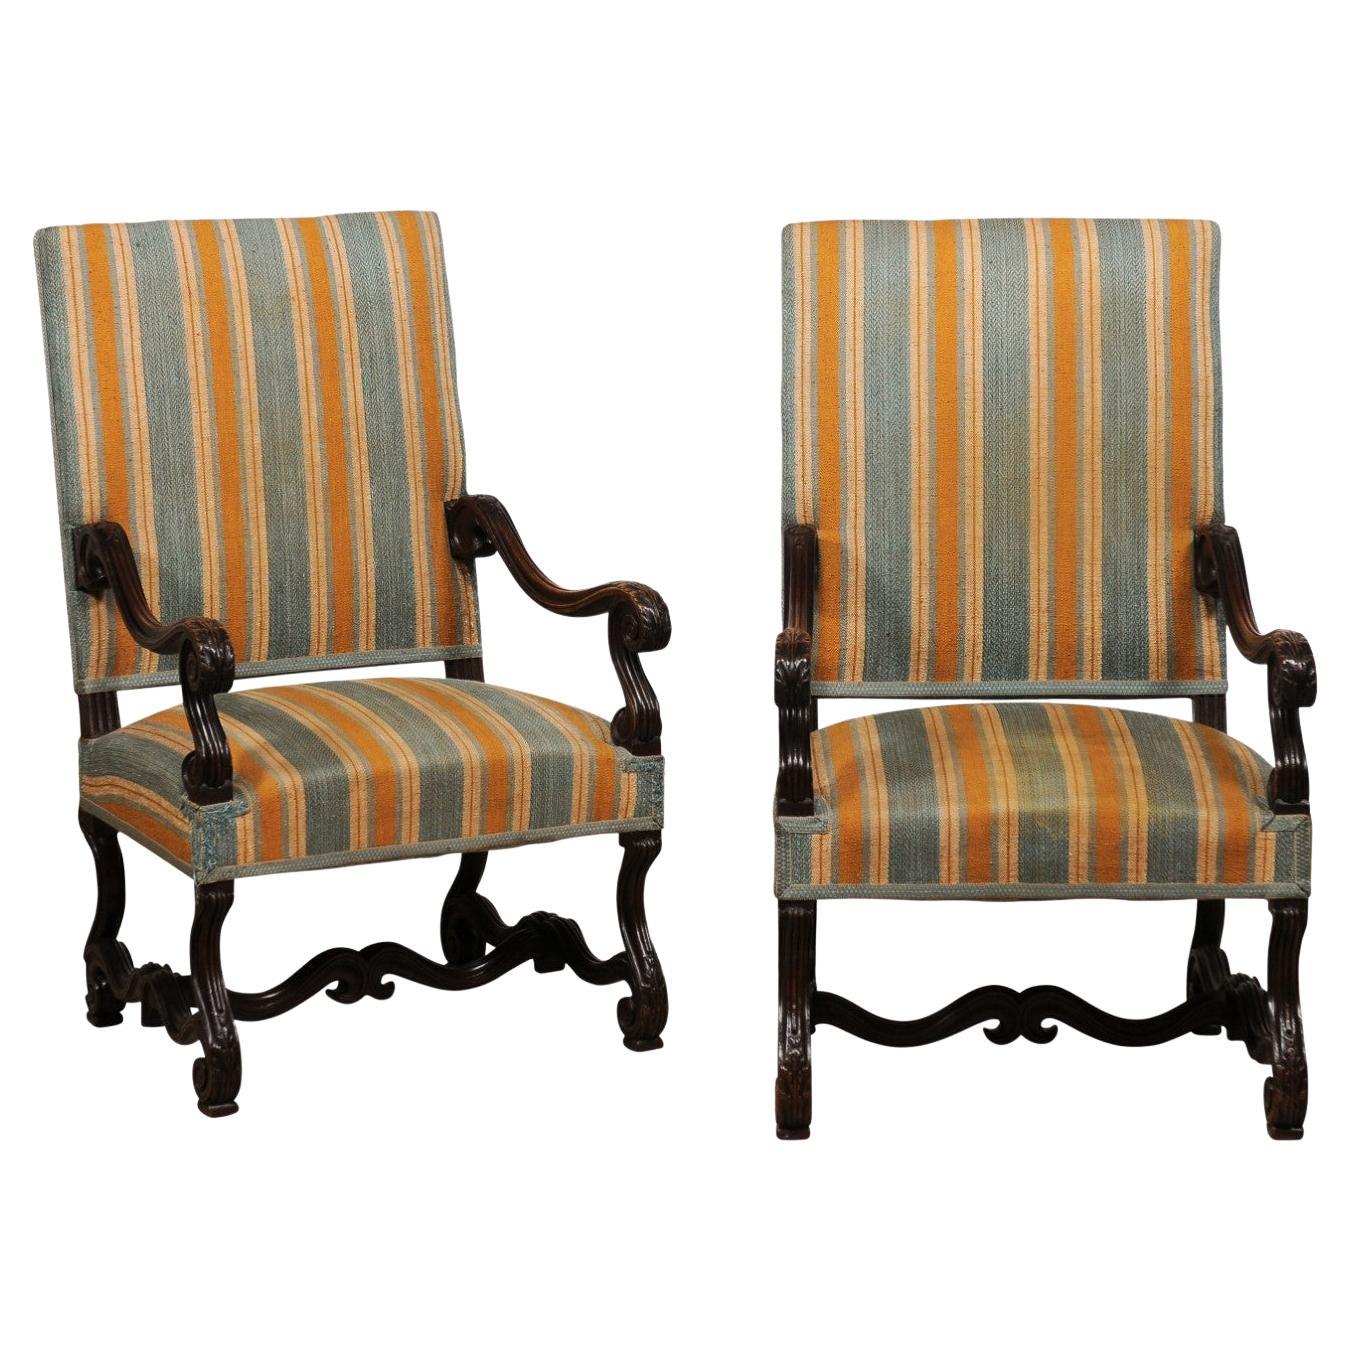 Louis XIII Style 19th Century French Os de Mouton Walnut Armchairs, a Pair For Sale